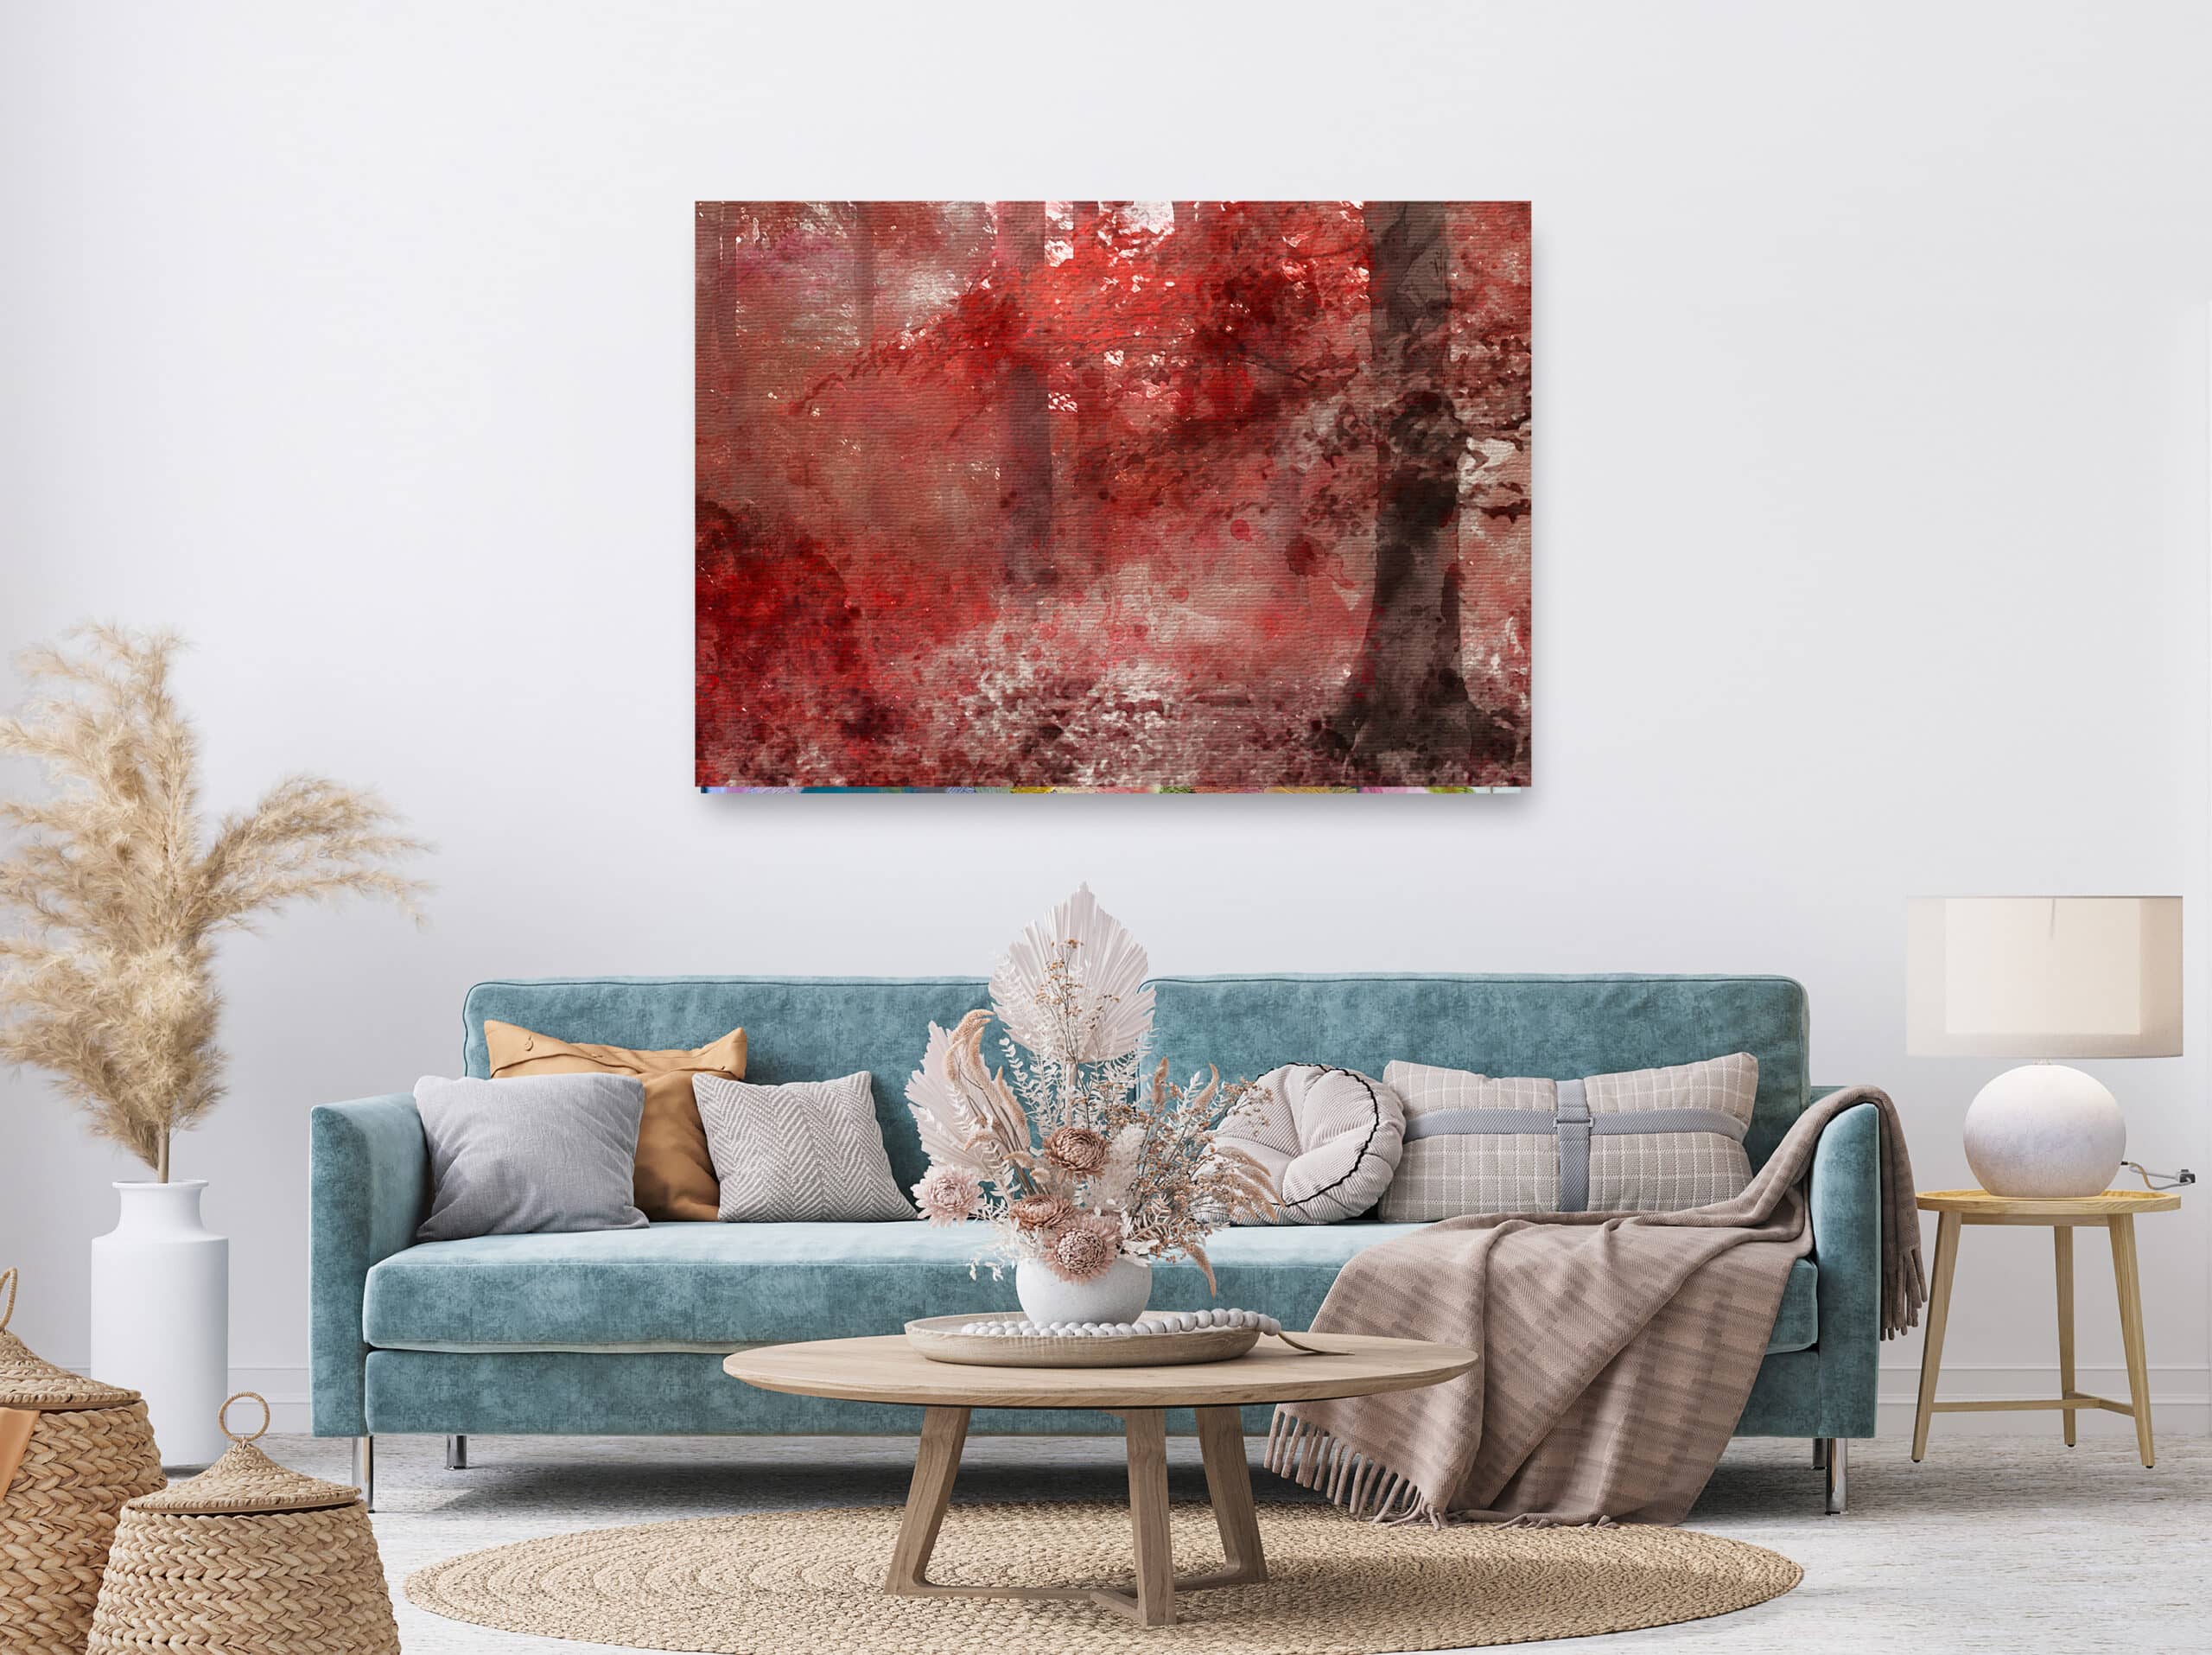 Wall murals-pictures-shop-paintings-red-magic-forest